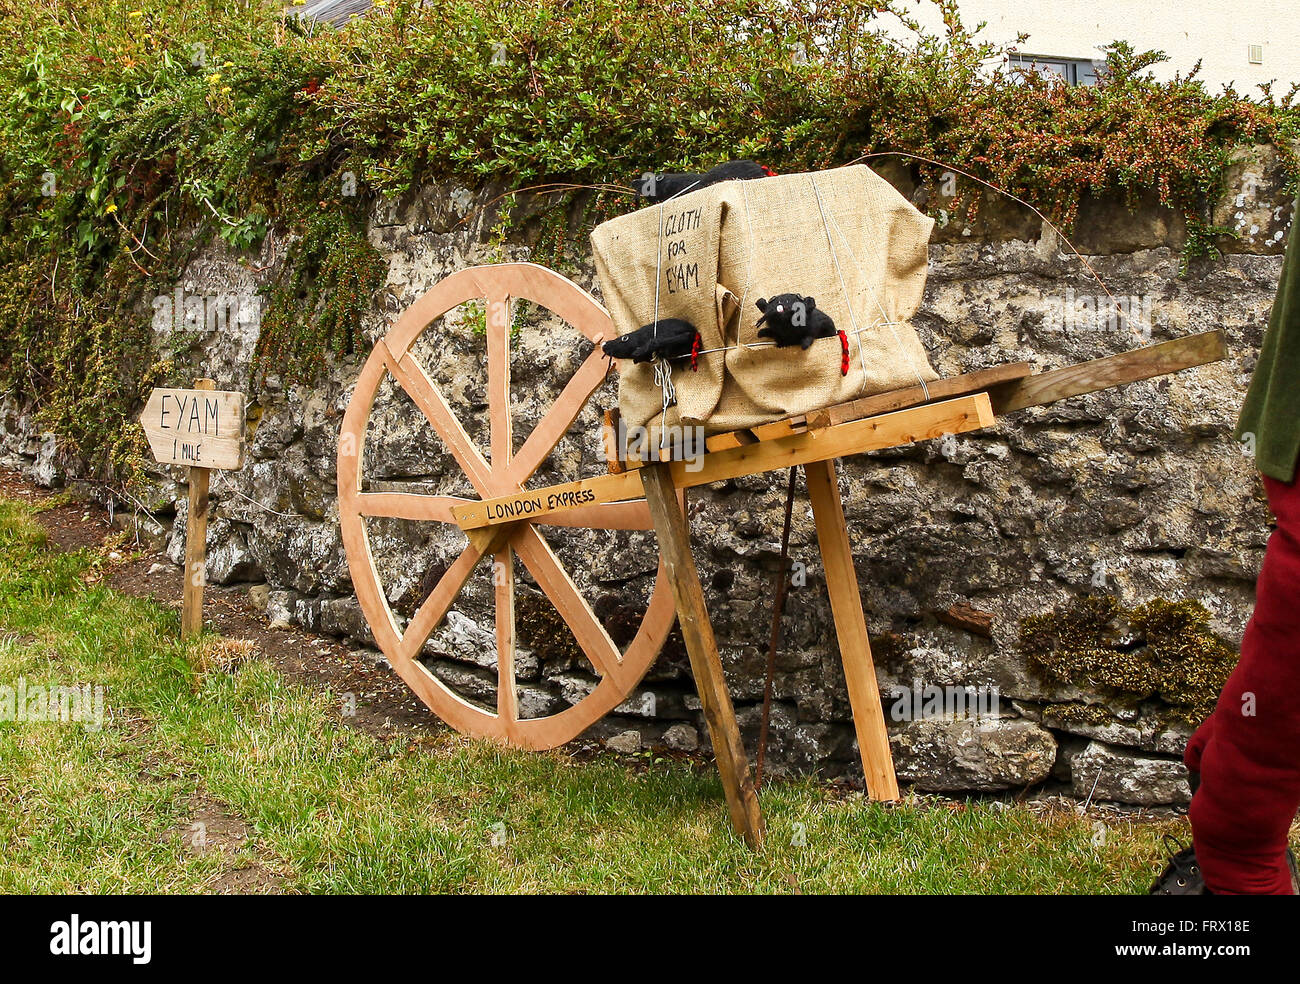 A wheel barrow with rats signifying the contaminated cloth that brought the plague or black death to Eyam Derbyshire England Stock Photo